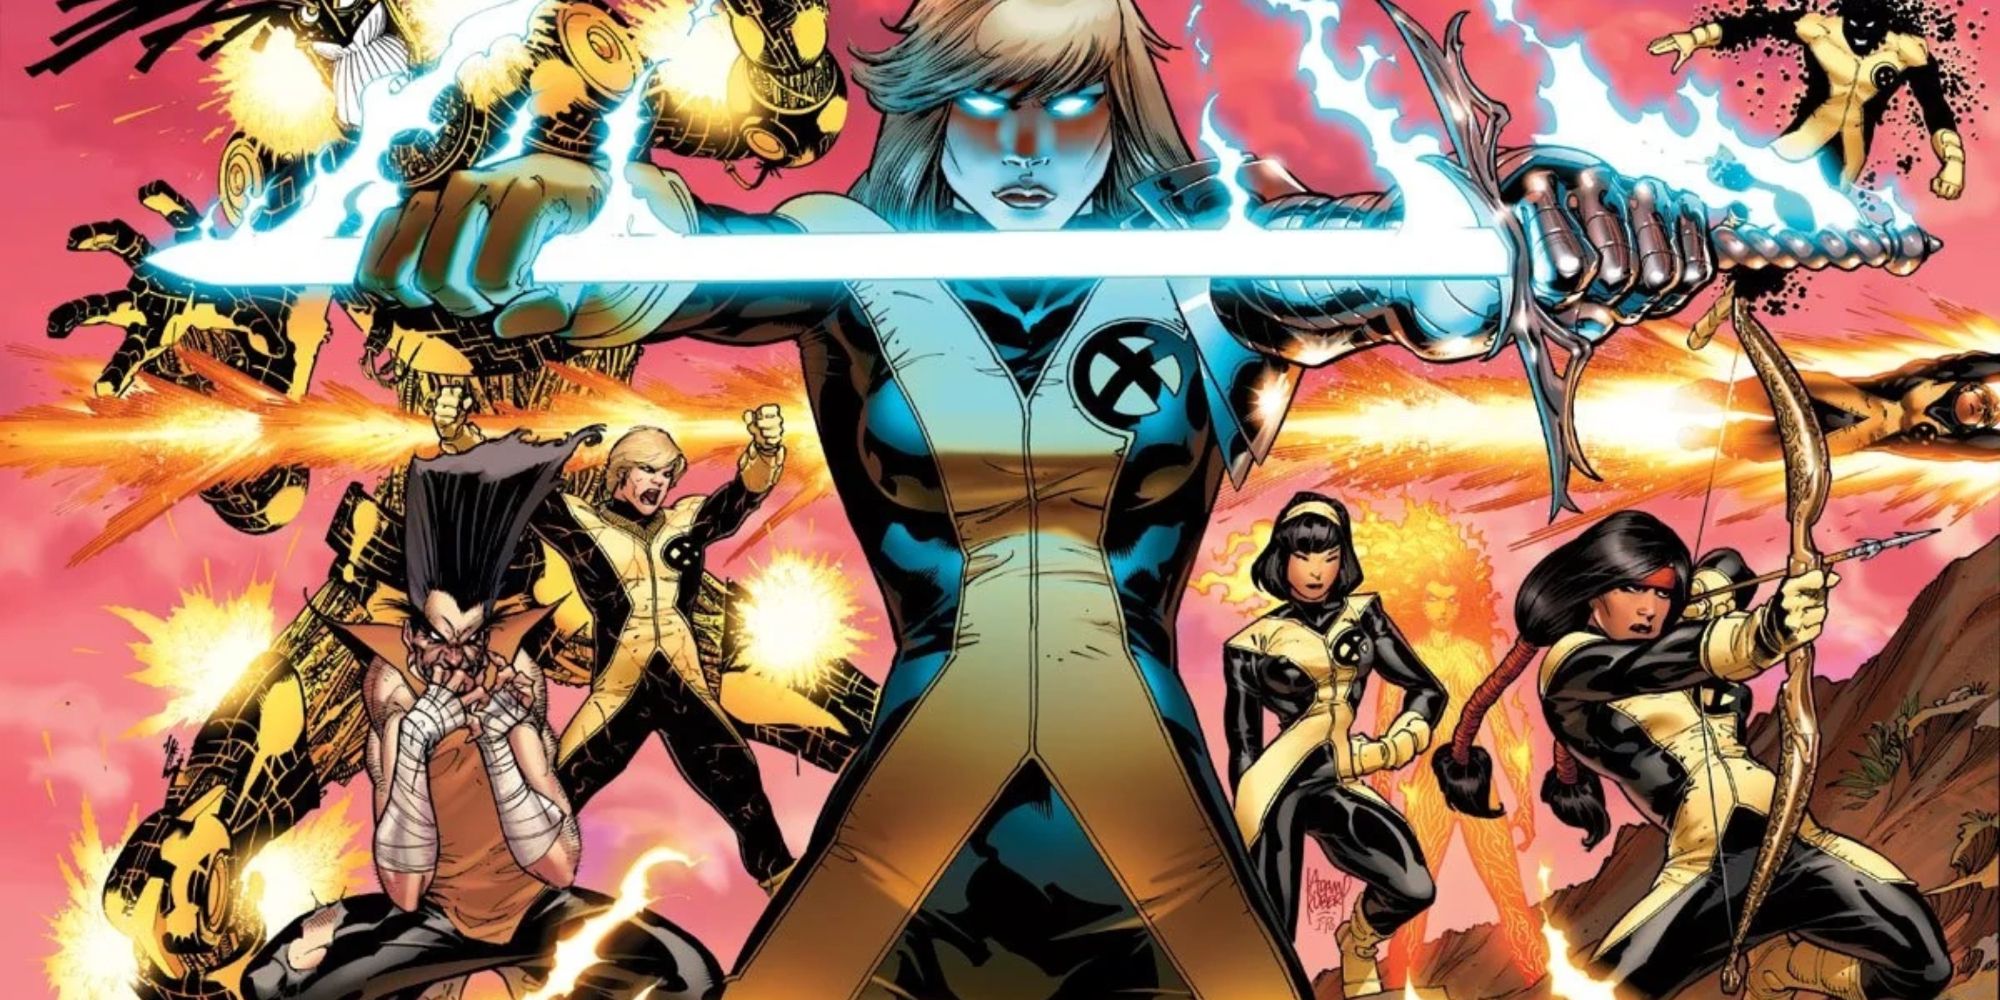 Marvel's New Mutants with Magik front and center.